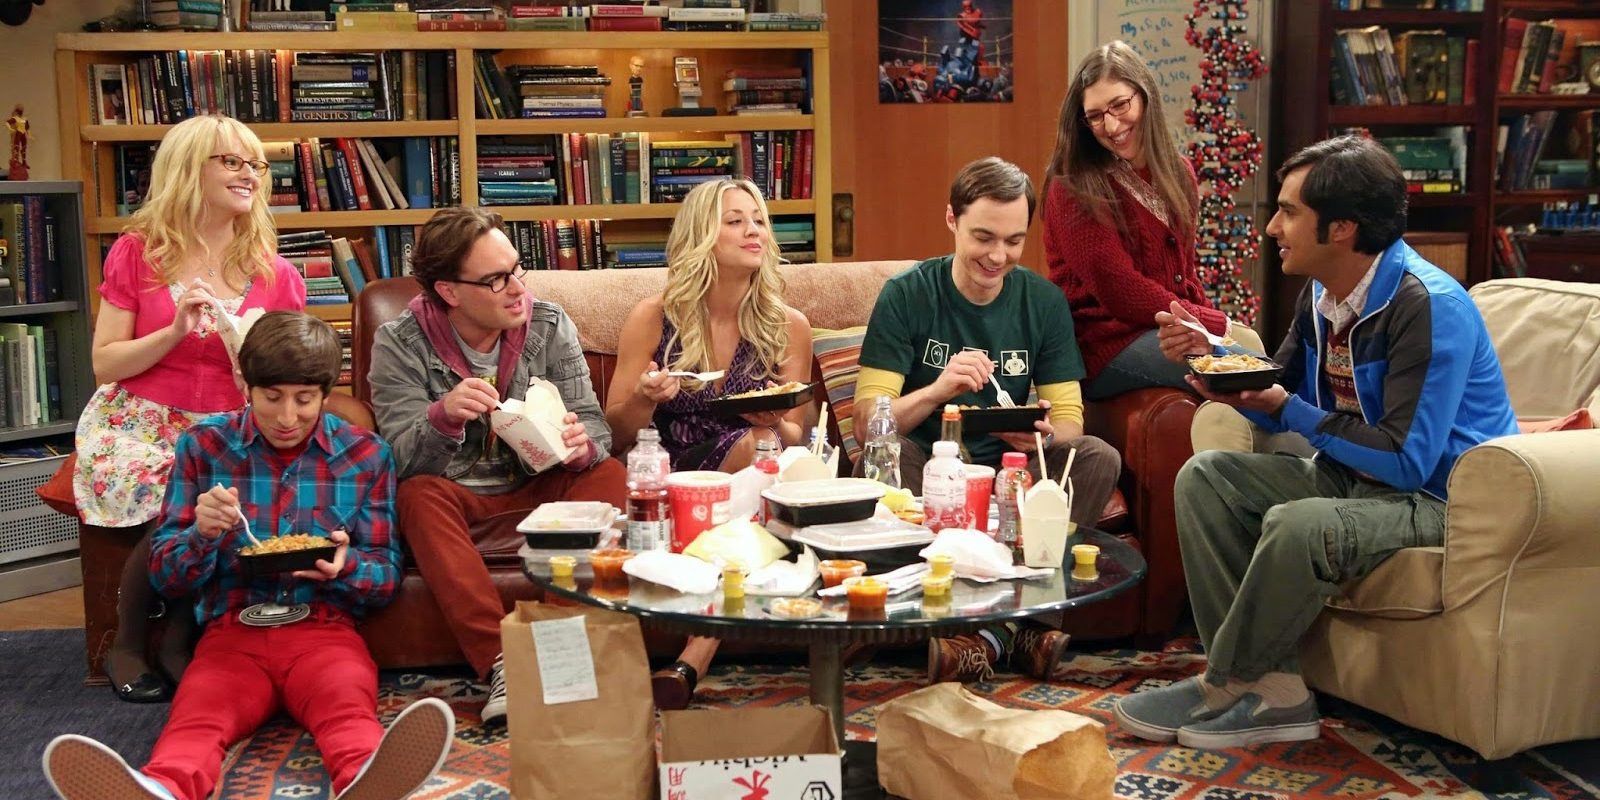 The Big Bang Theory 10 Characters With The Most Screen Time Ranked